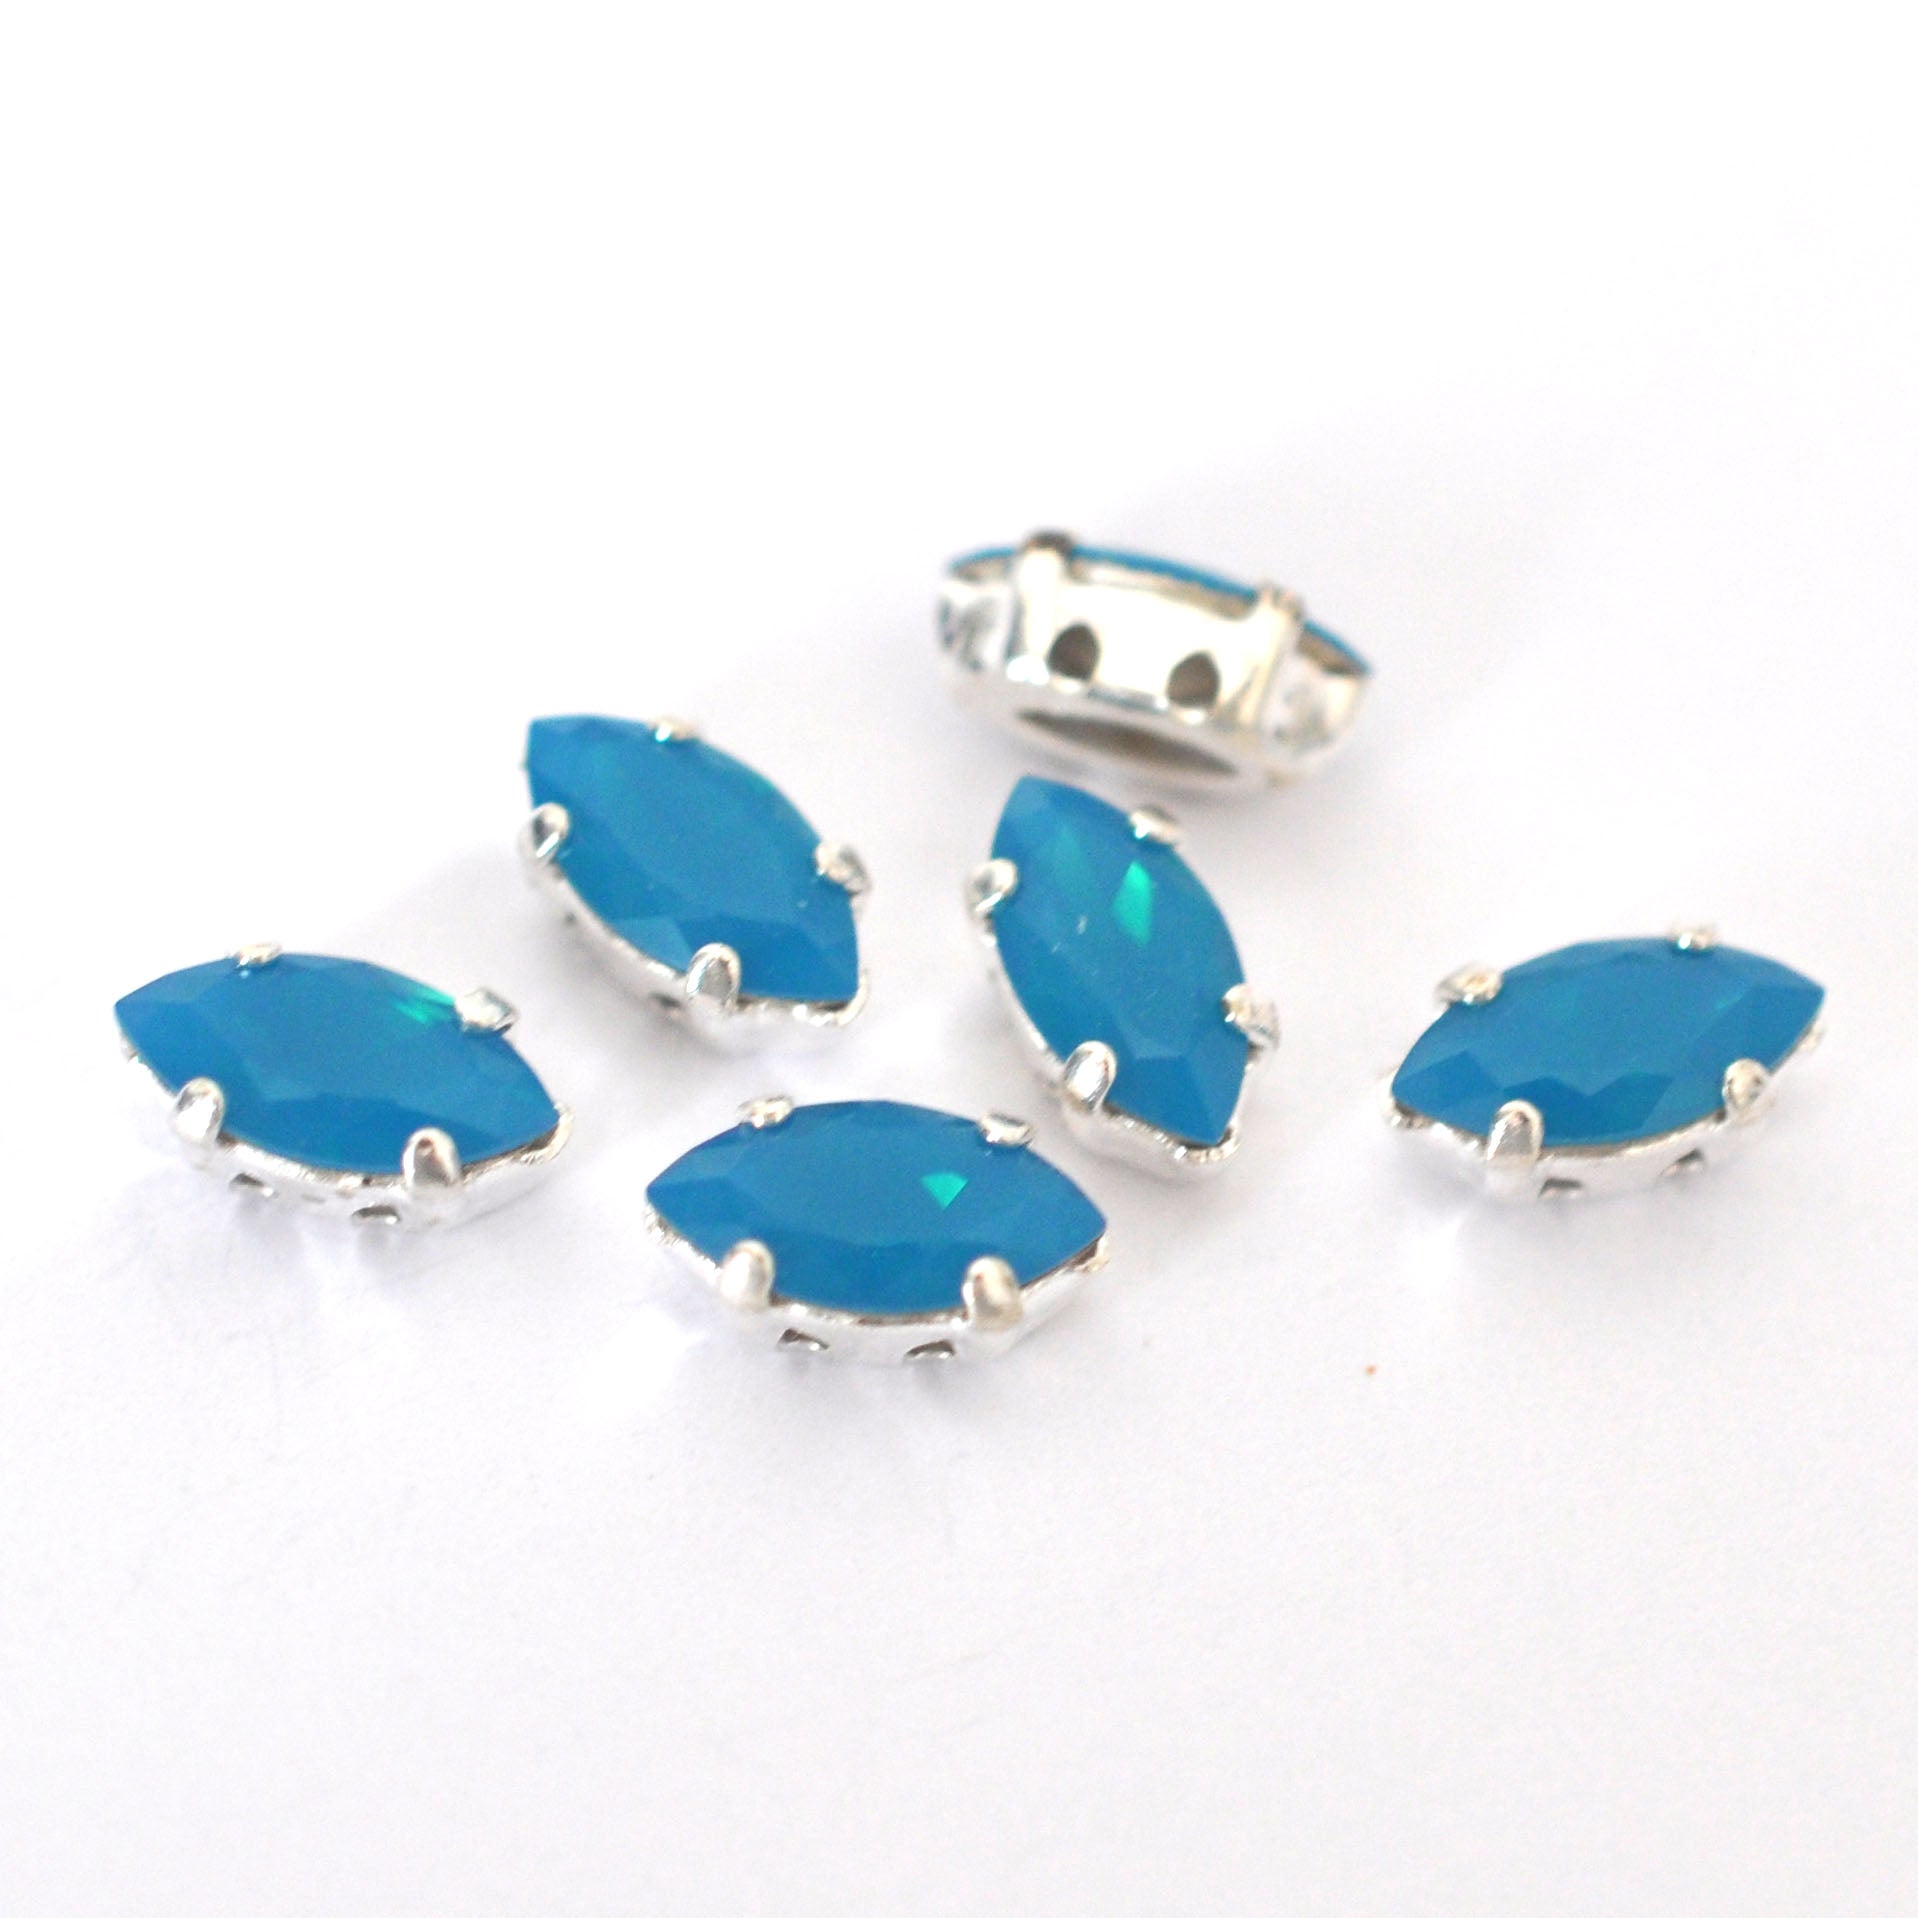 Caribbean Blue Opal 10x5mm Navette Sew On Crystals - 6 Pieces